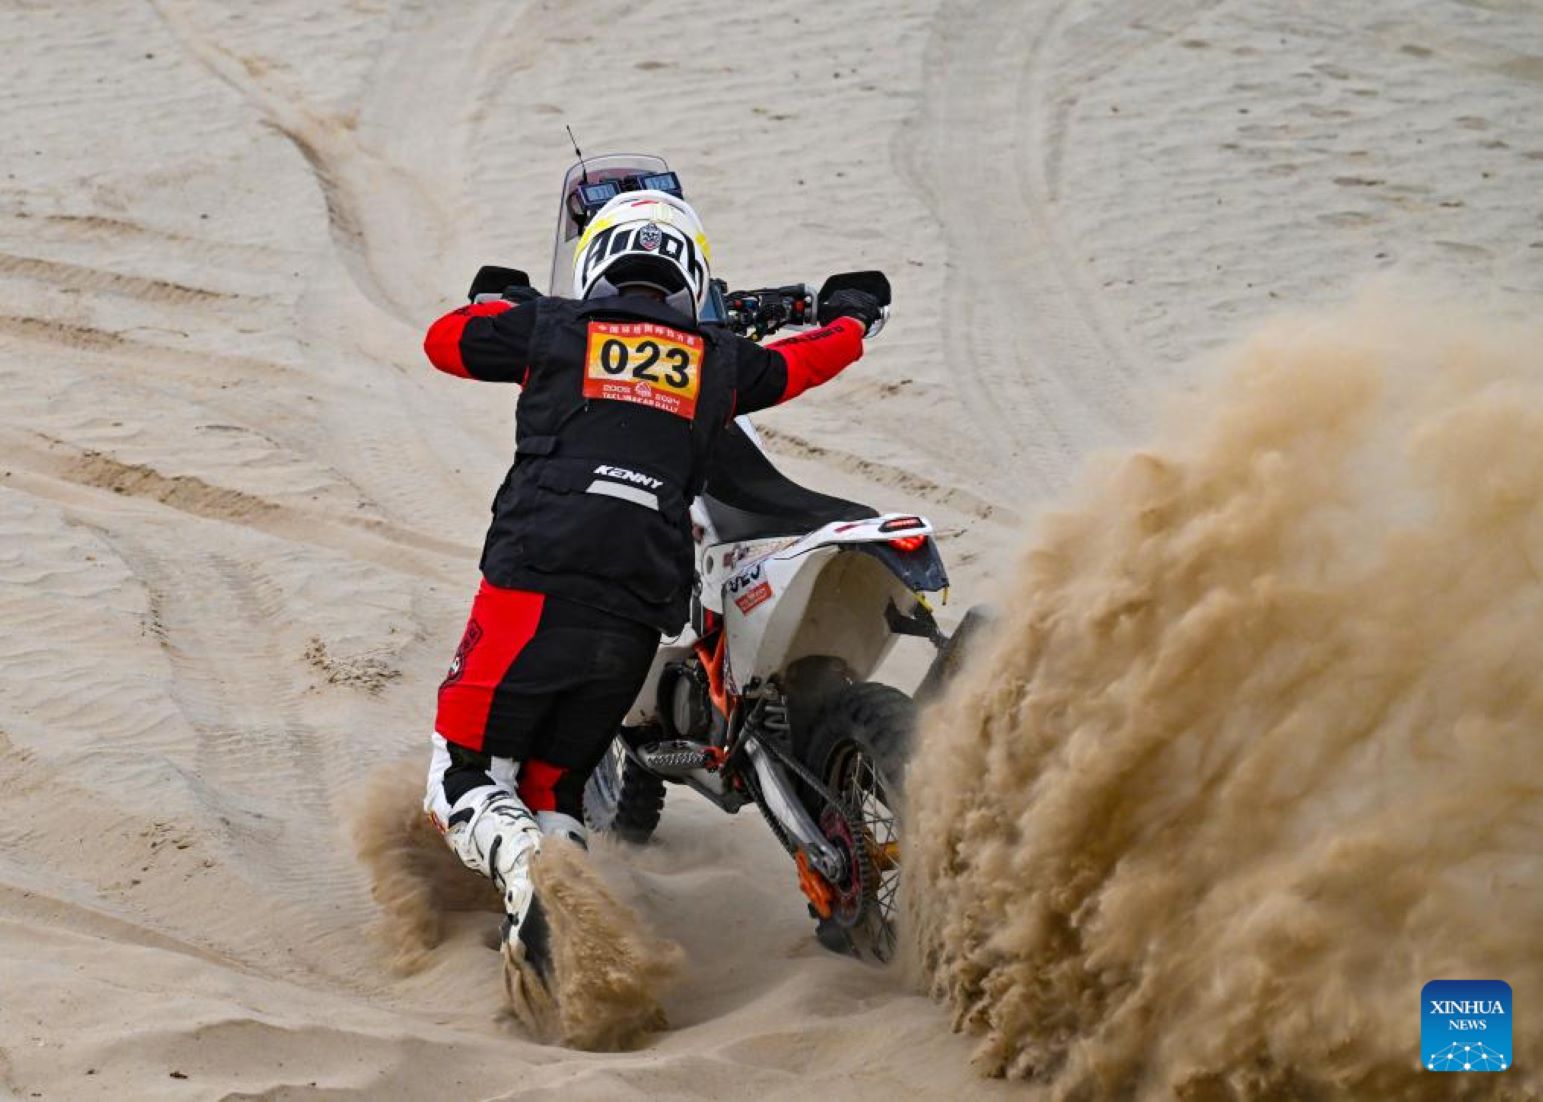 Mongolian Rider Pursues Passion For Racing In Taklimakan Rally